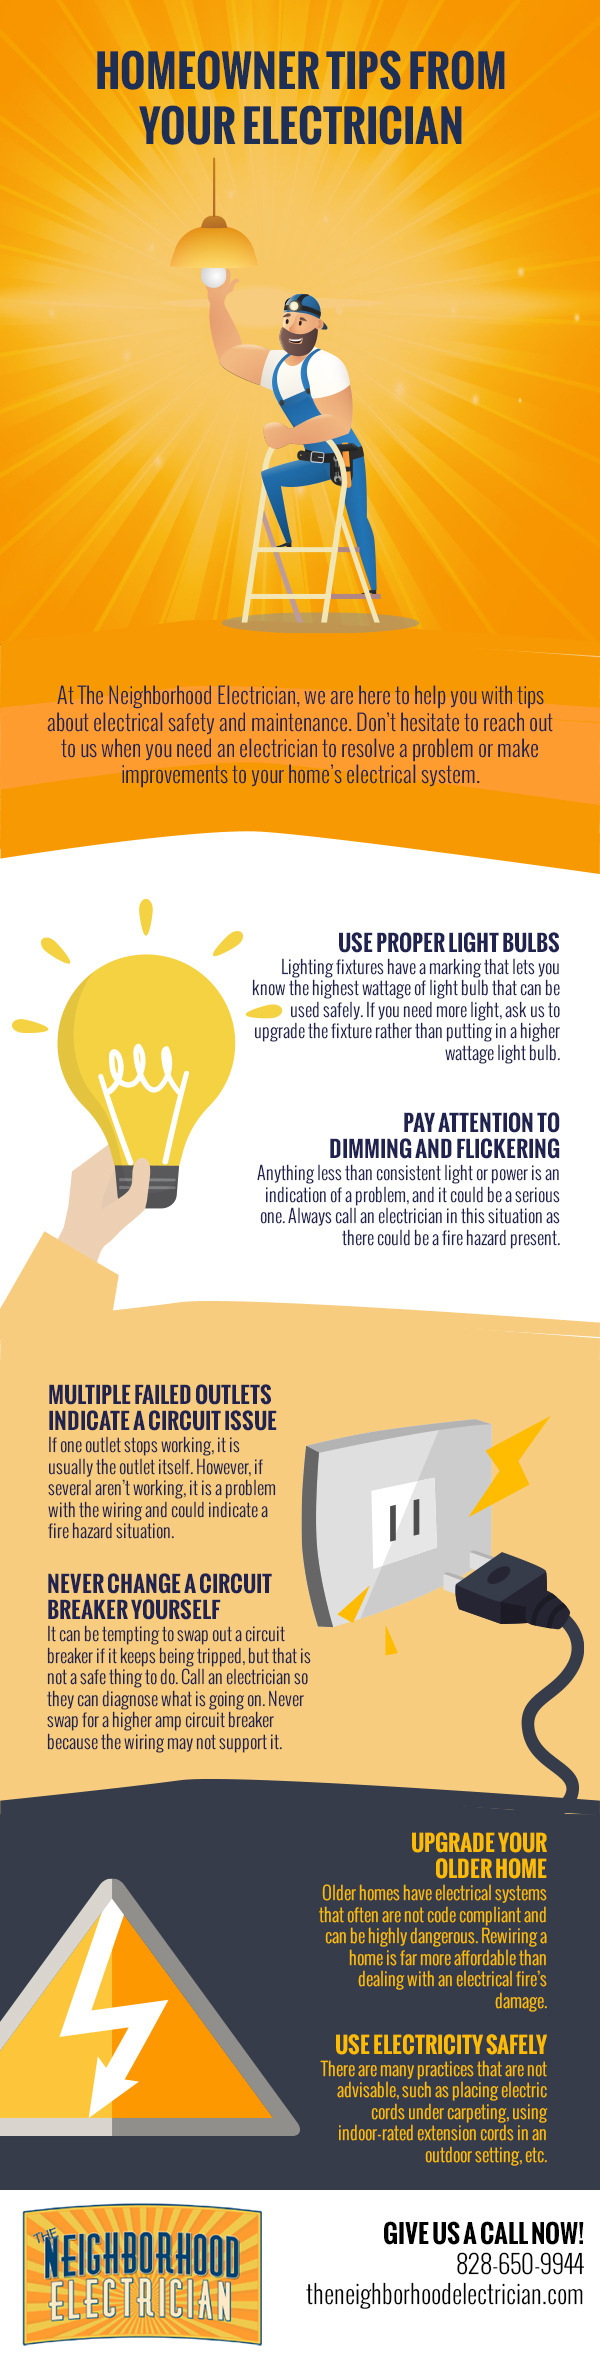 Homeowner Tips from Your Electrician [infographic]